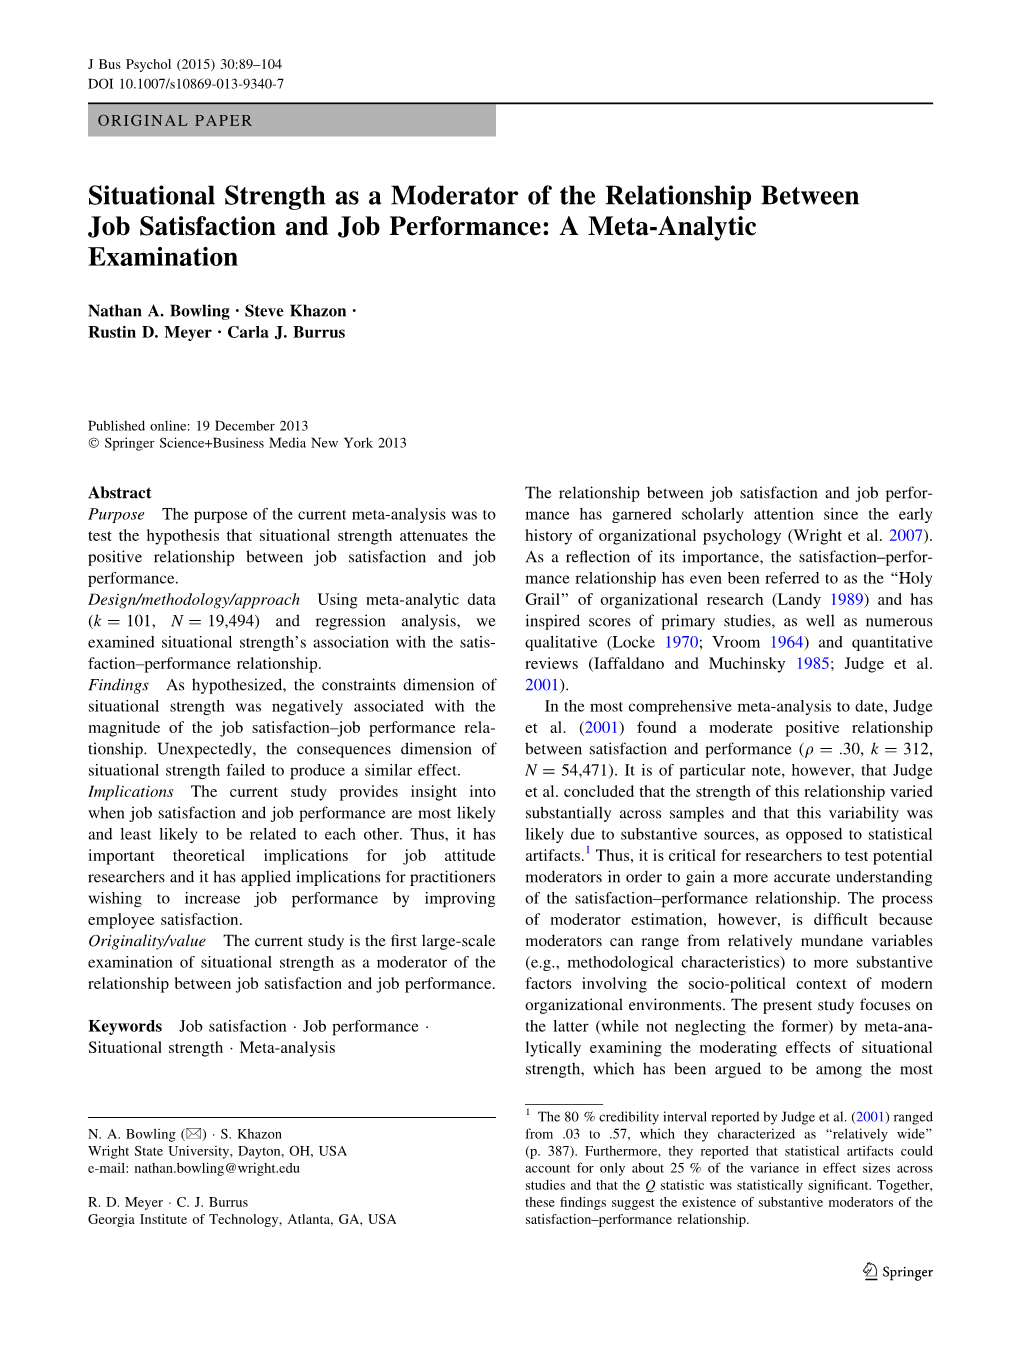 Situational Strength As a Moderator of the Relationship Between Job Satisfaction and Job Performance: a Meta-Analytic Examination